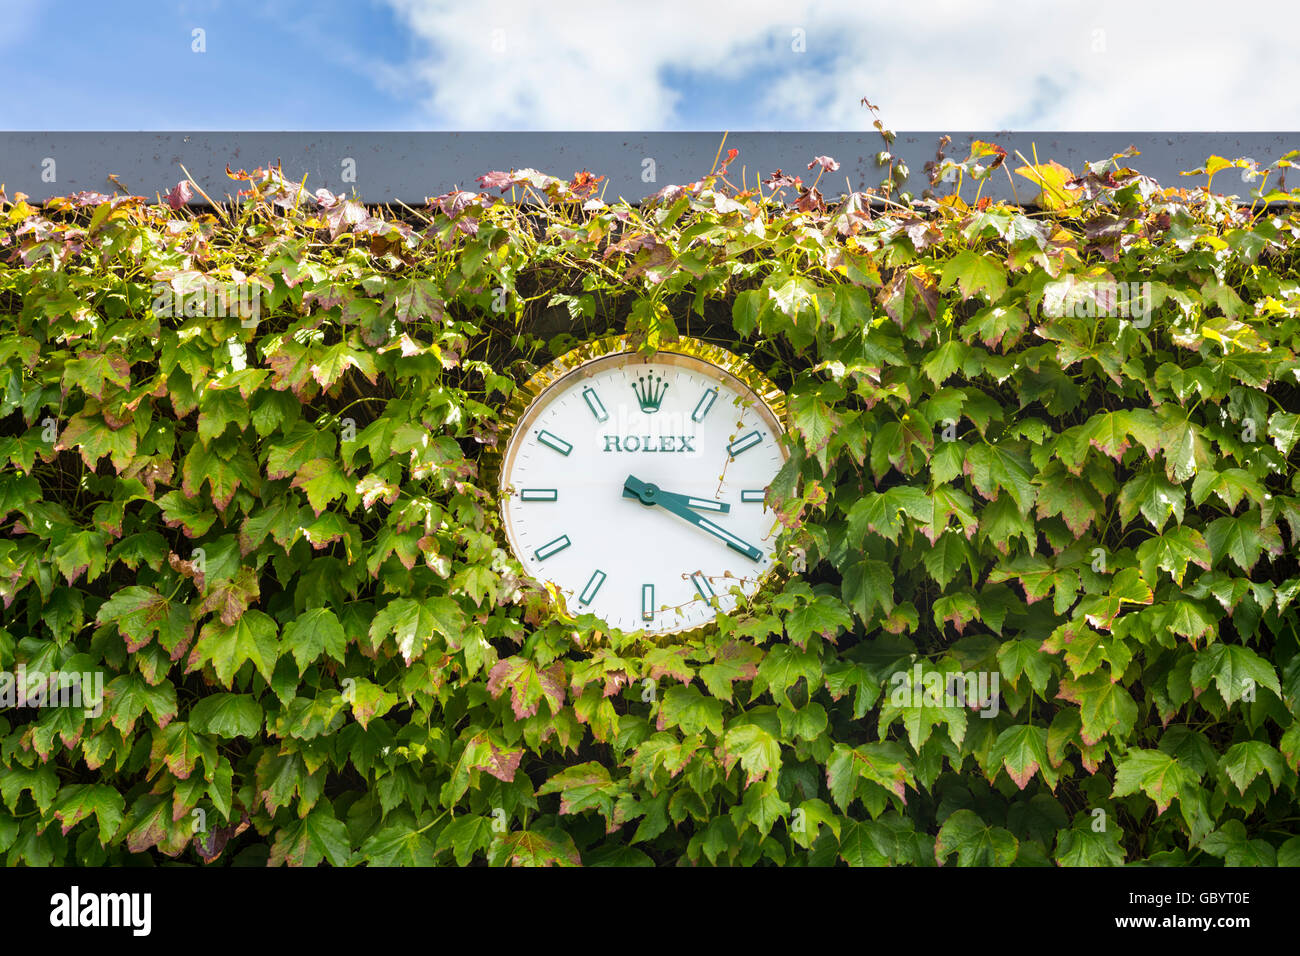 Rolex wall clock surrounded by ivy at the All England Lawn Tennis Club during Wimbledon 2016 Stock Photo